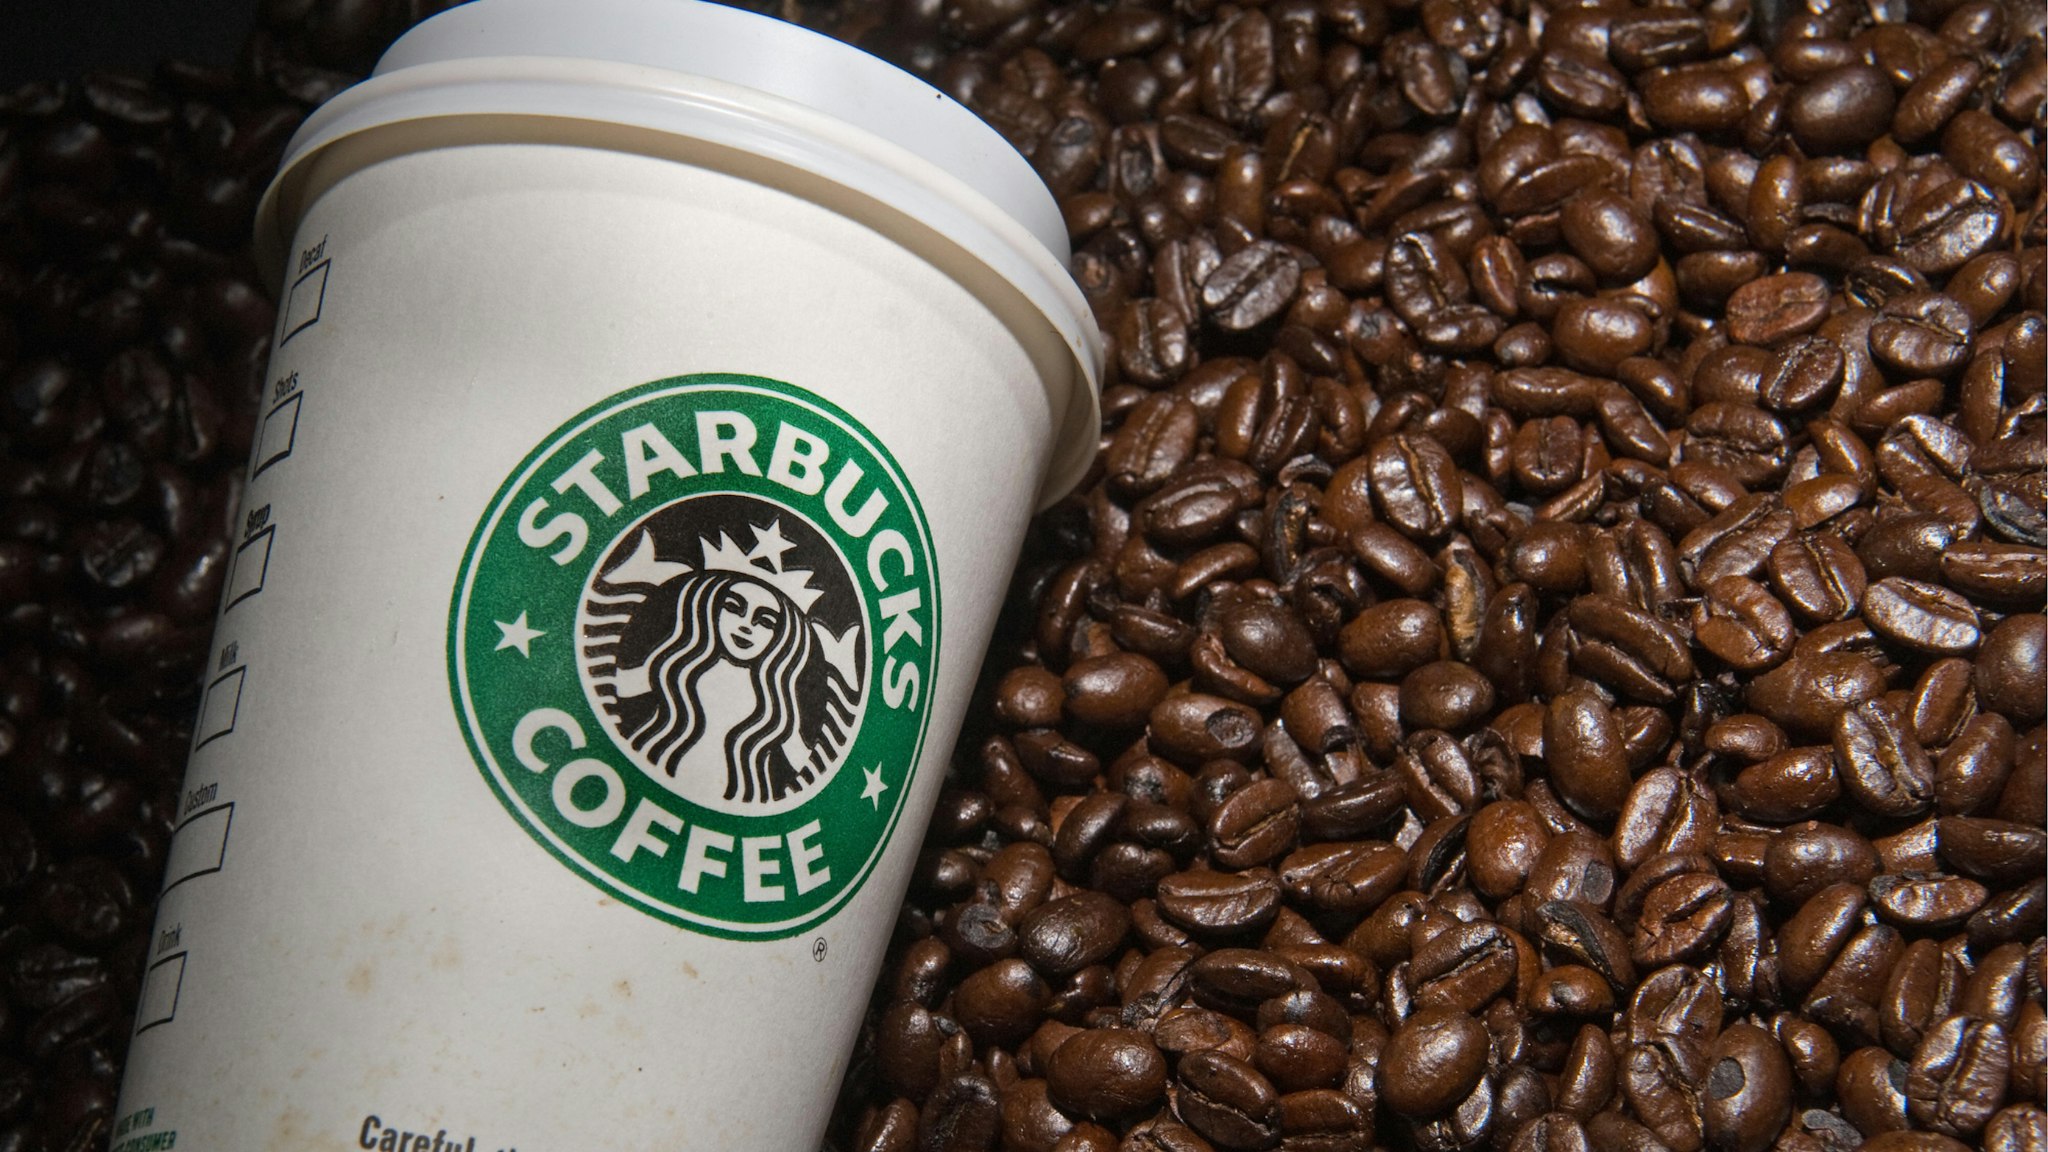 A Starbucks coffee cup and beans are seen in this photo taken August 12, 2009 in Washington, DC.